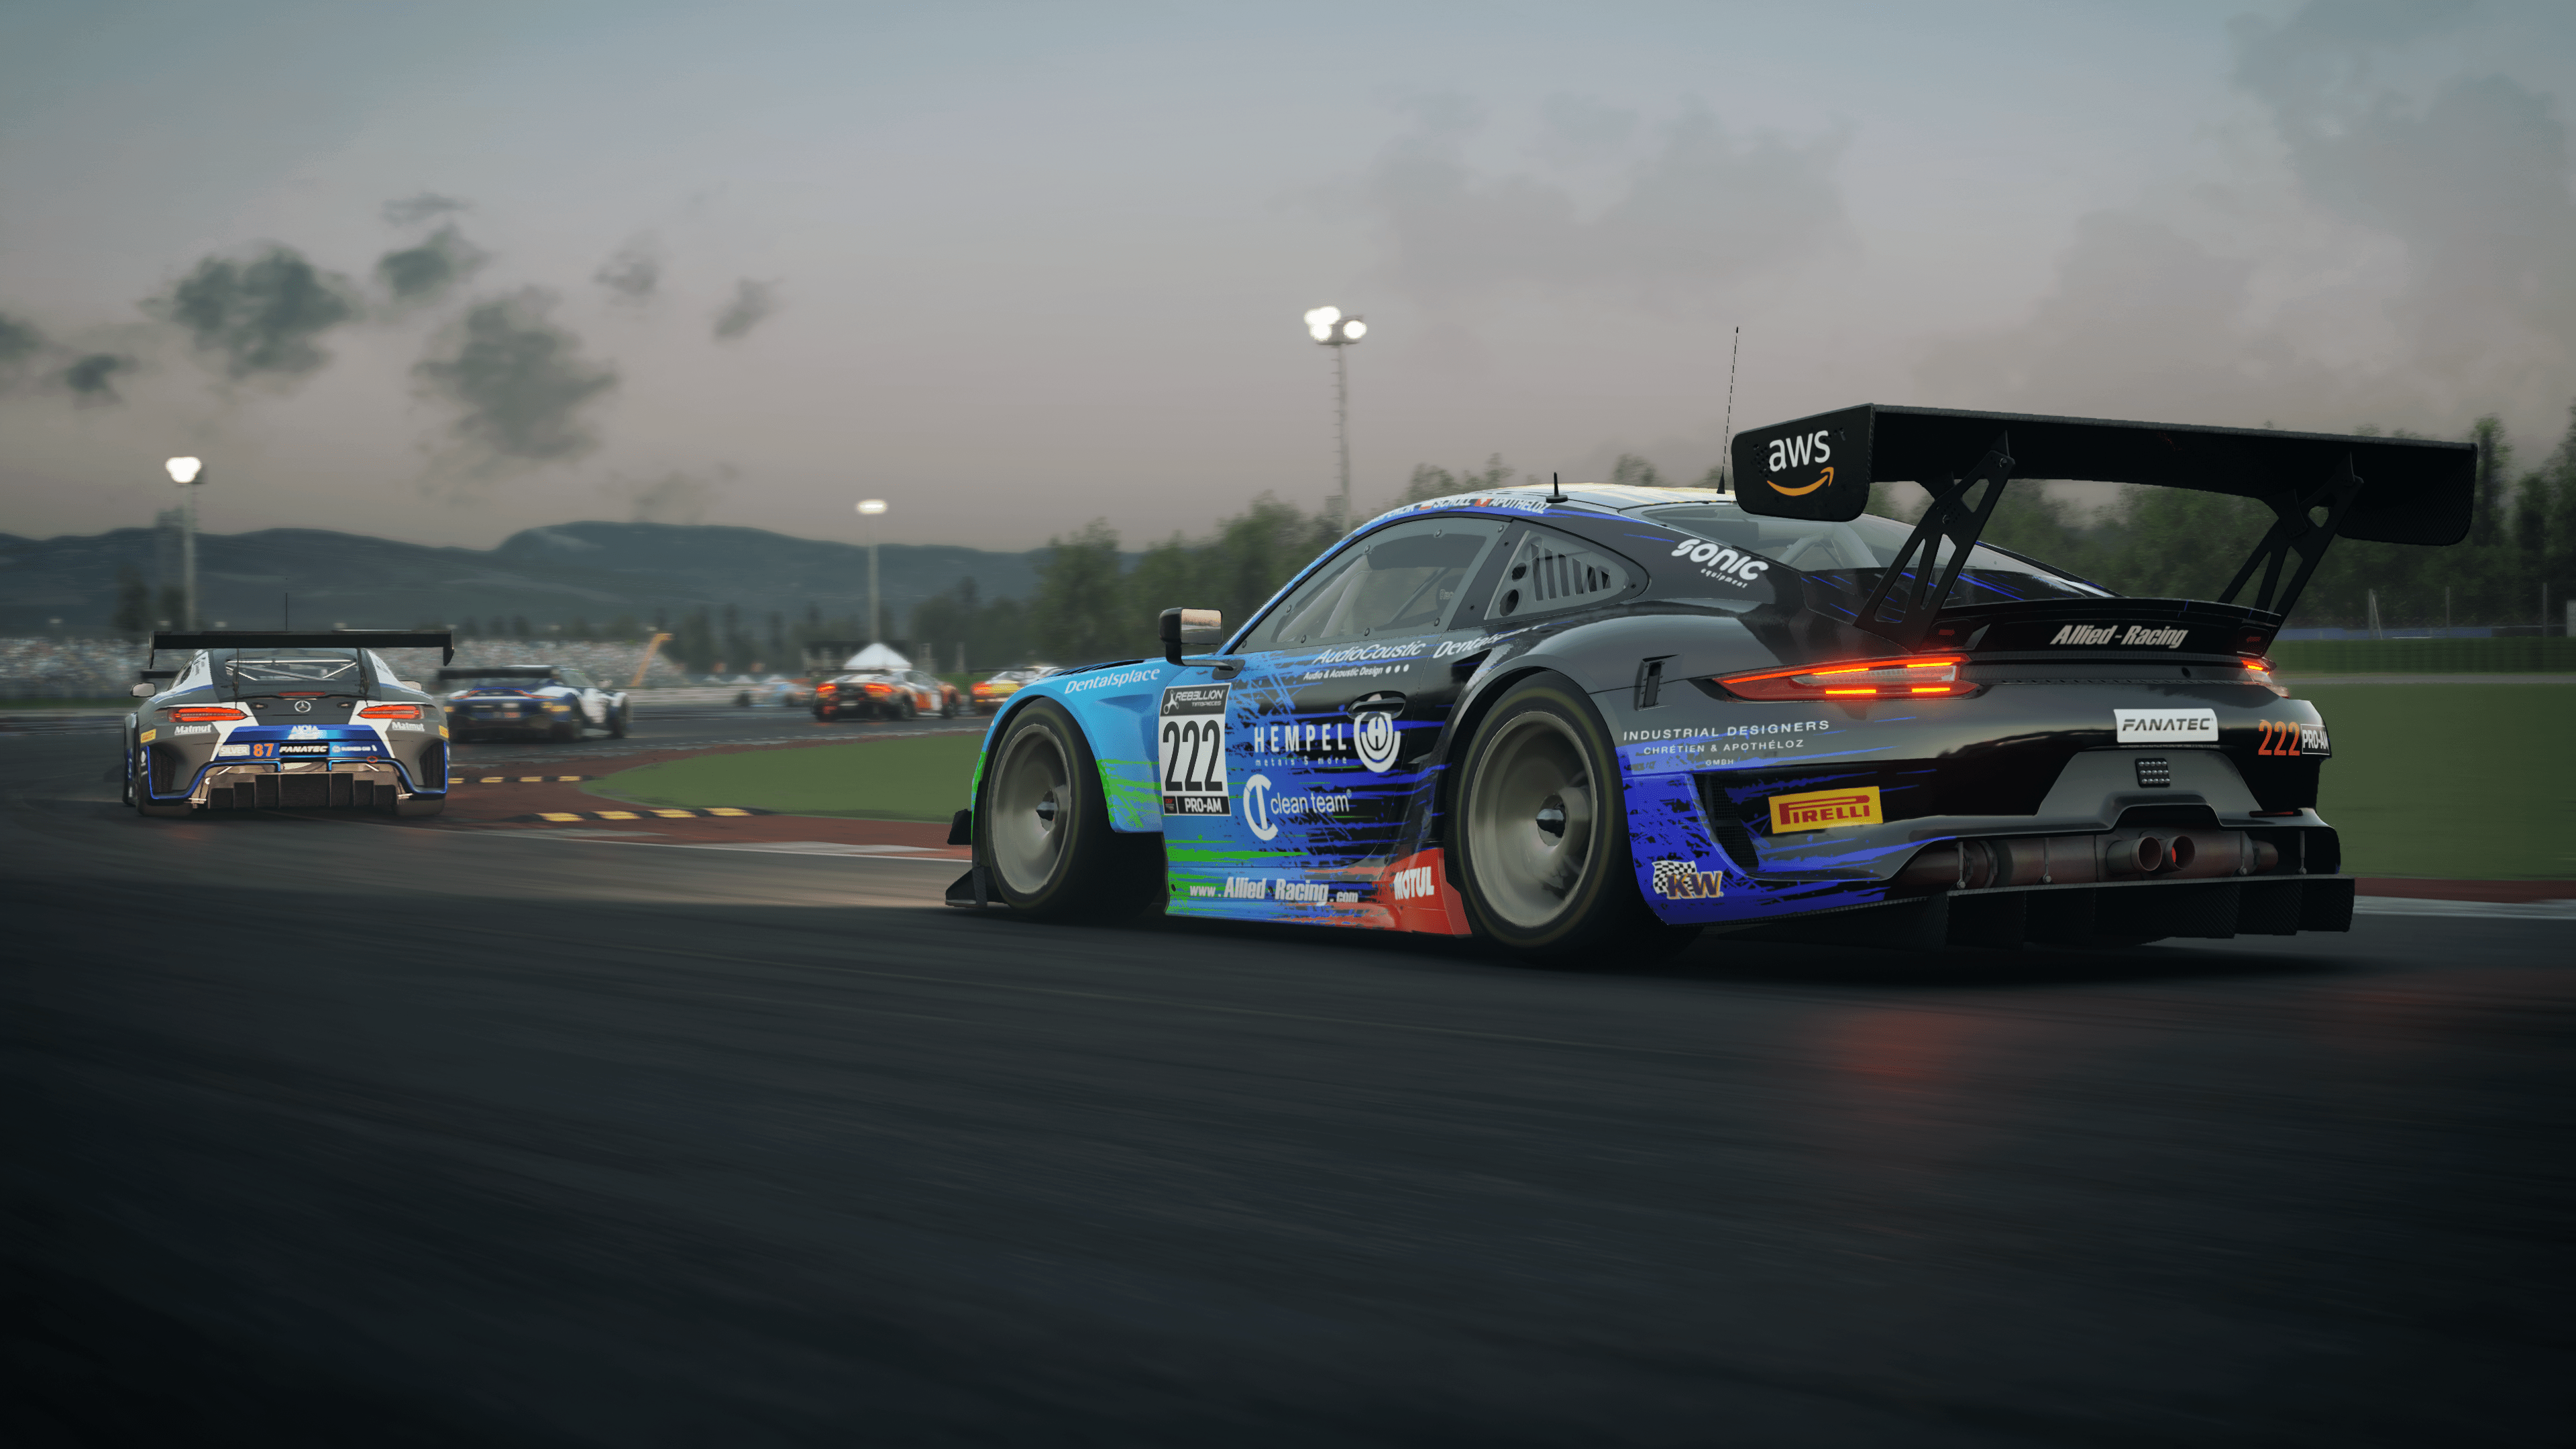 ESPORTS: Ultimate test awaits Assetto Corsa Competizione racers as